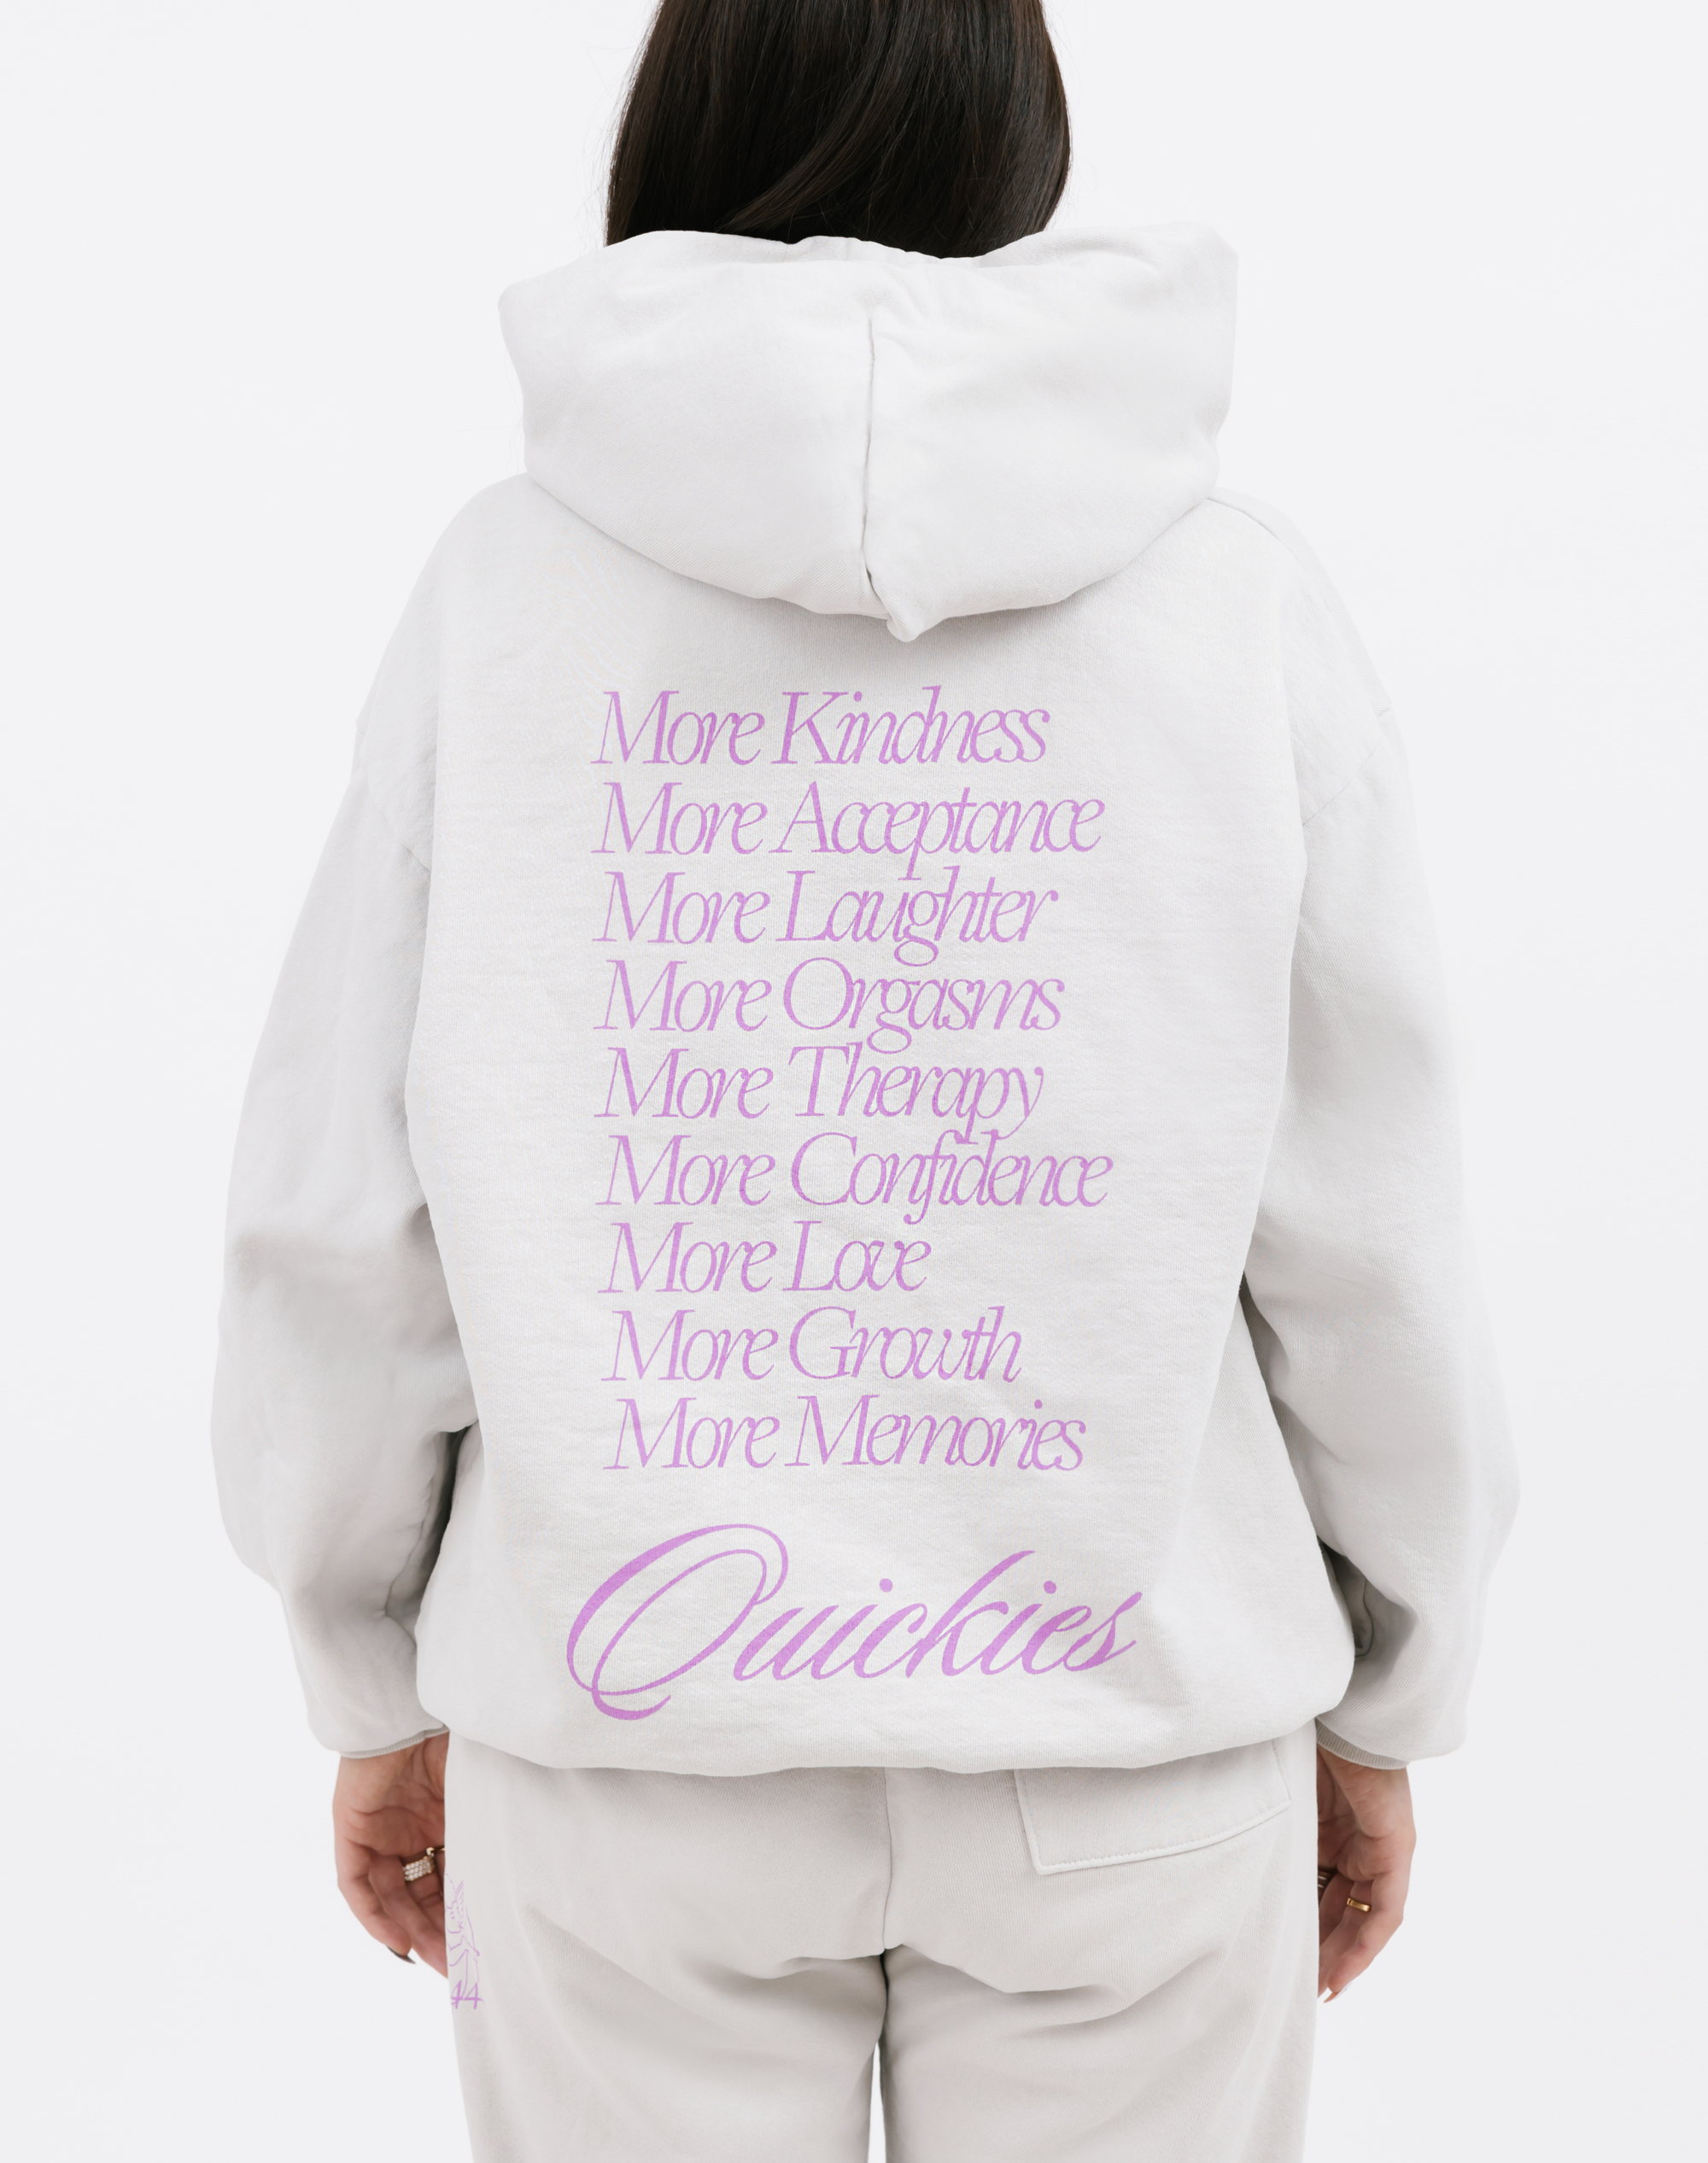 *Limited Edition* Not Your Baby Luxe Oversized Hoodie